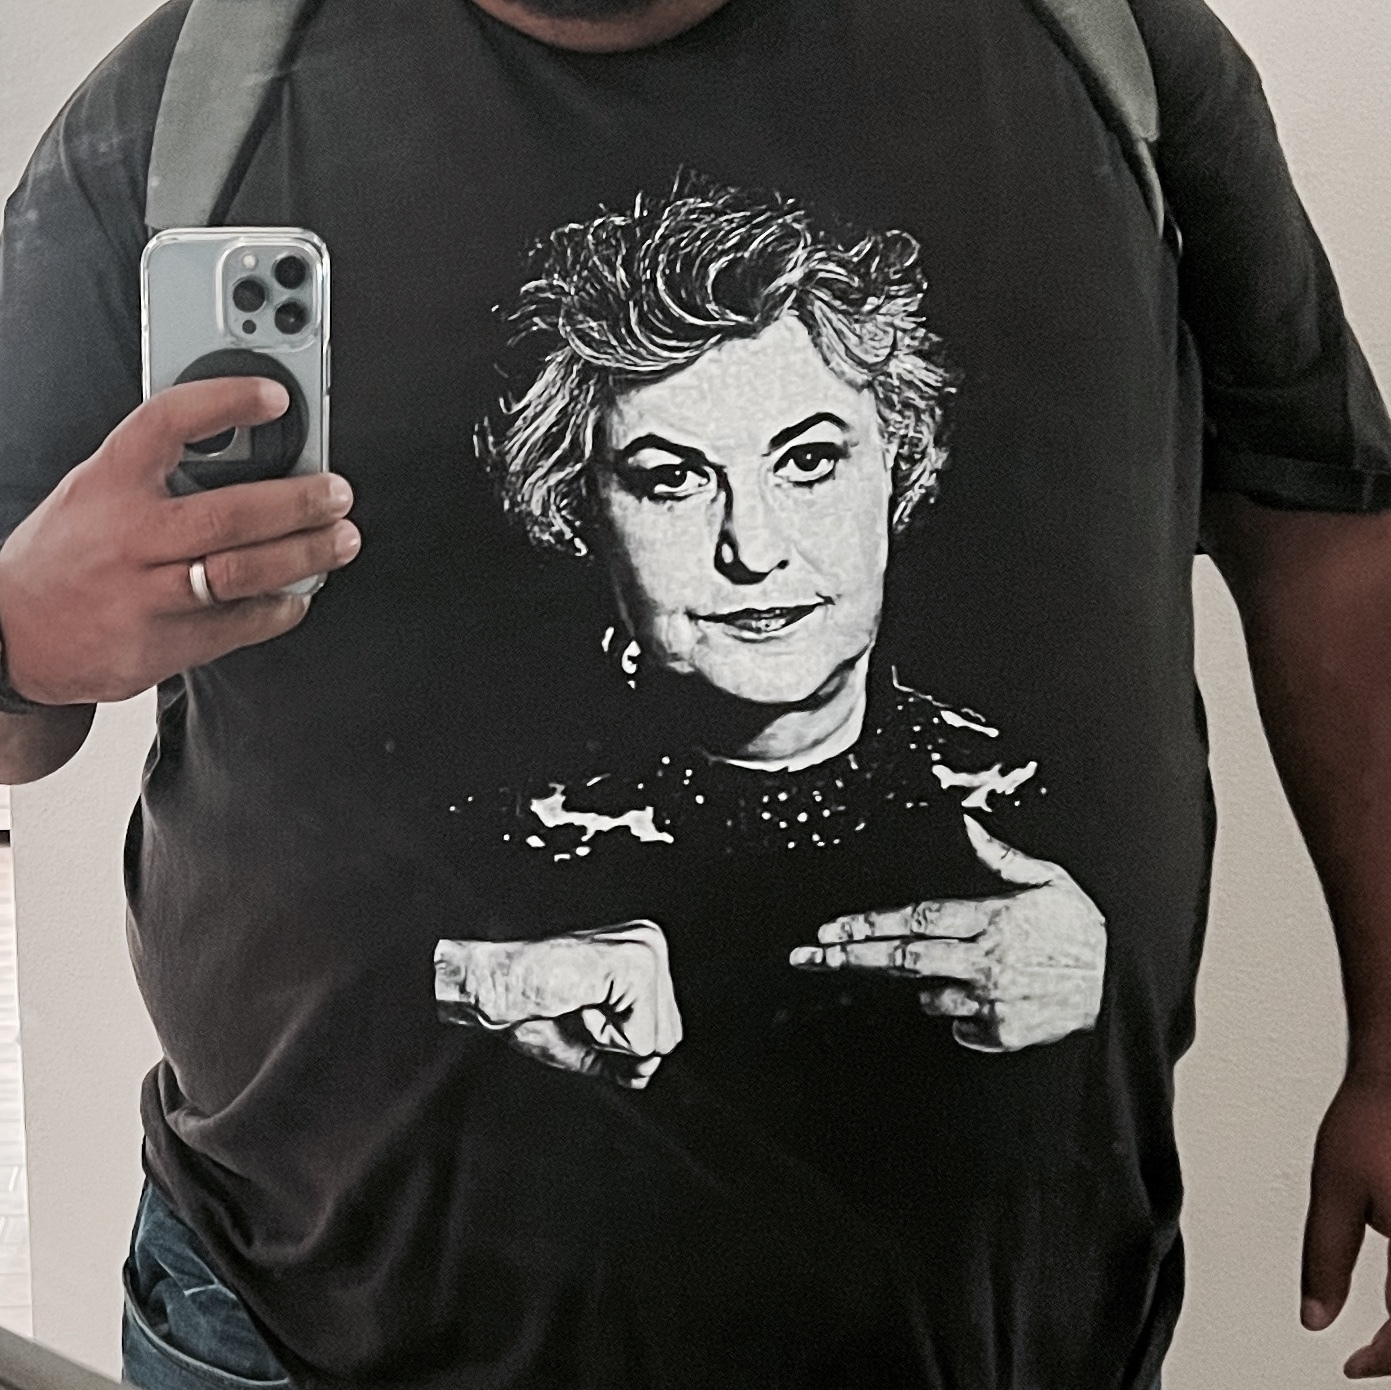 Me wearing a black tshirt with Bea Arthur with her hands doing the Run The Jewels sign